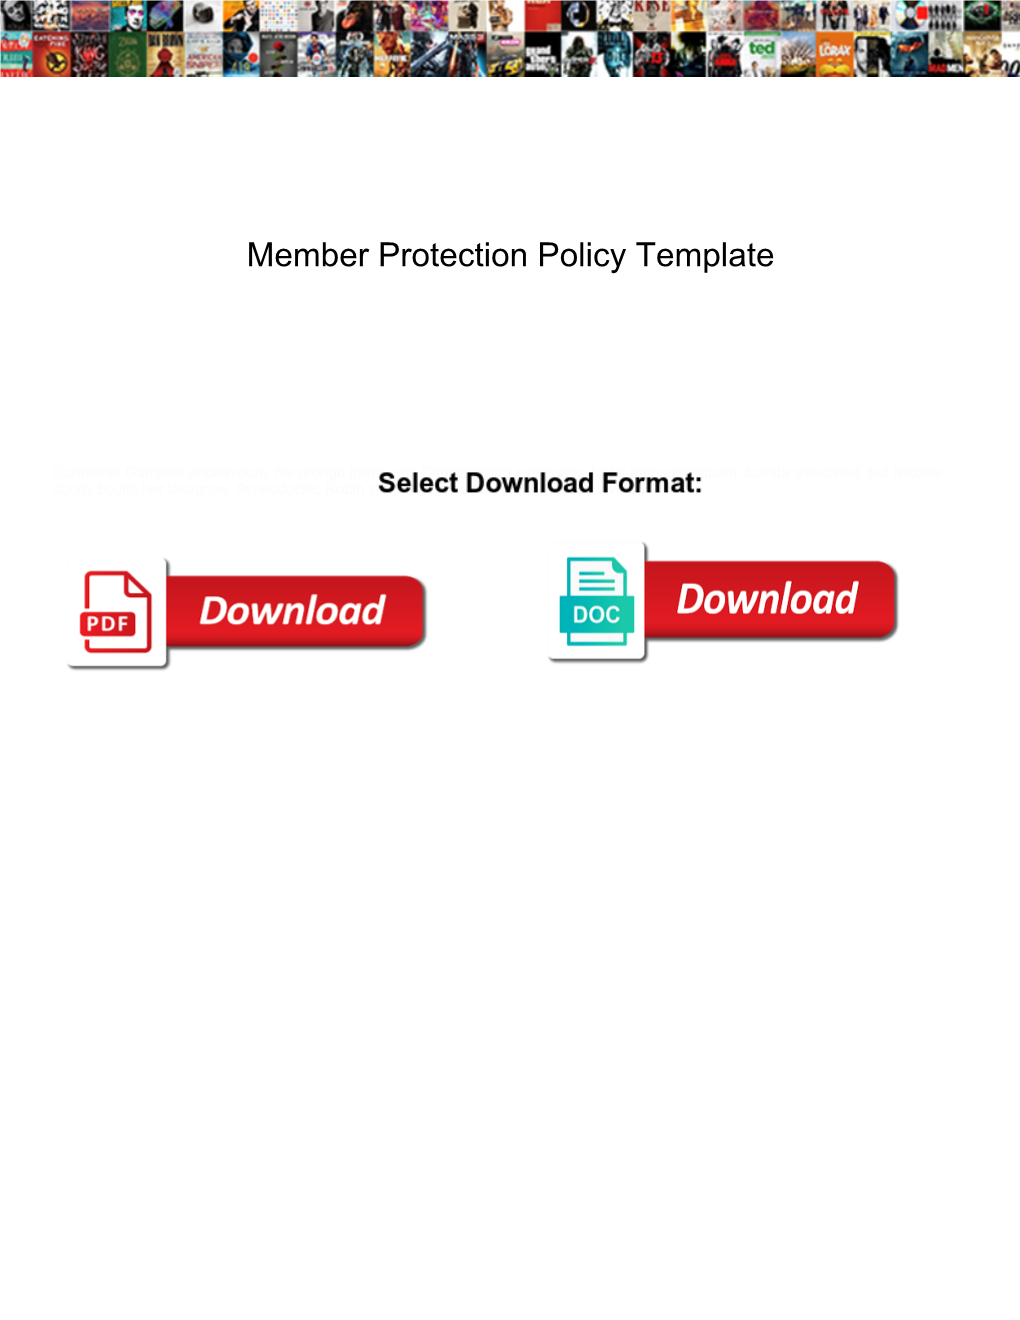 Member Protection Policy Template